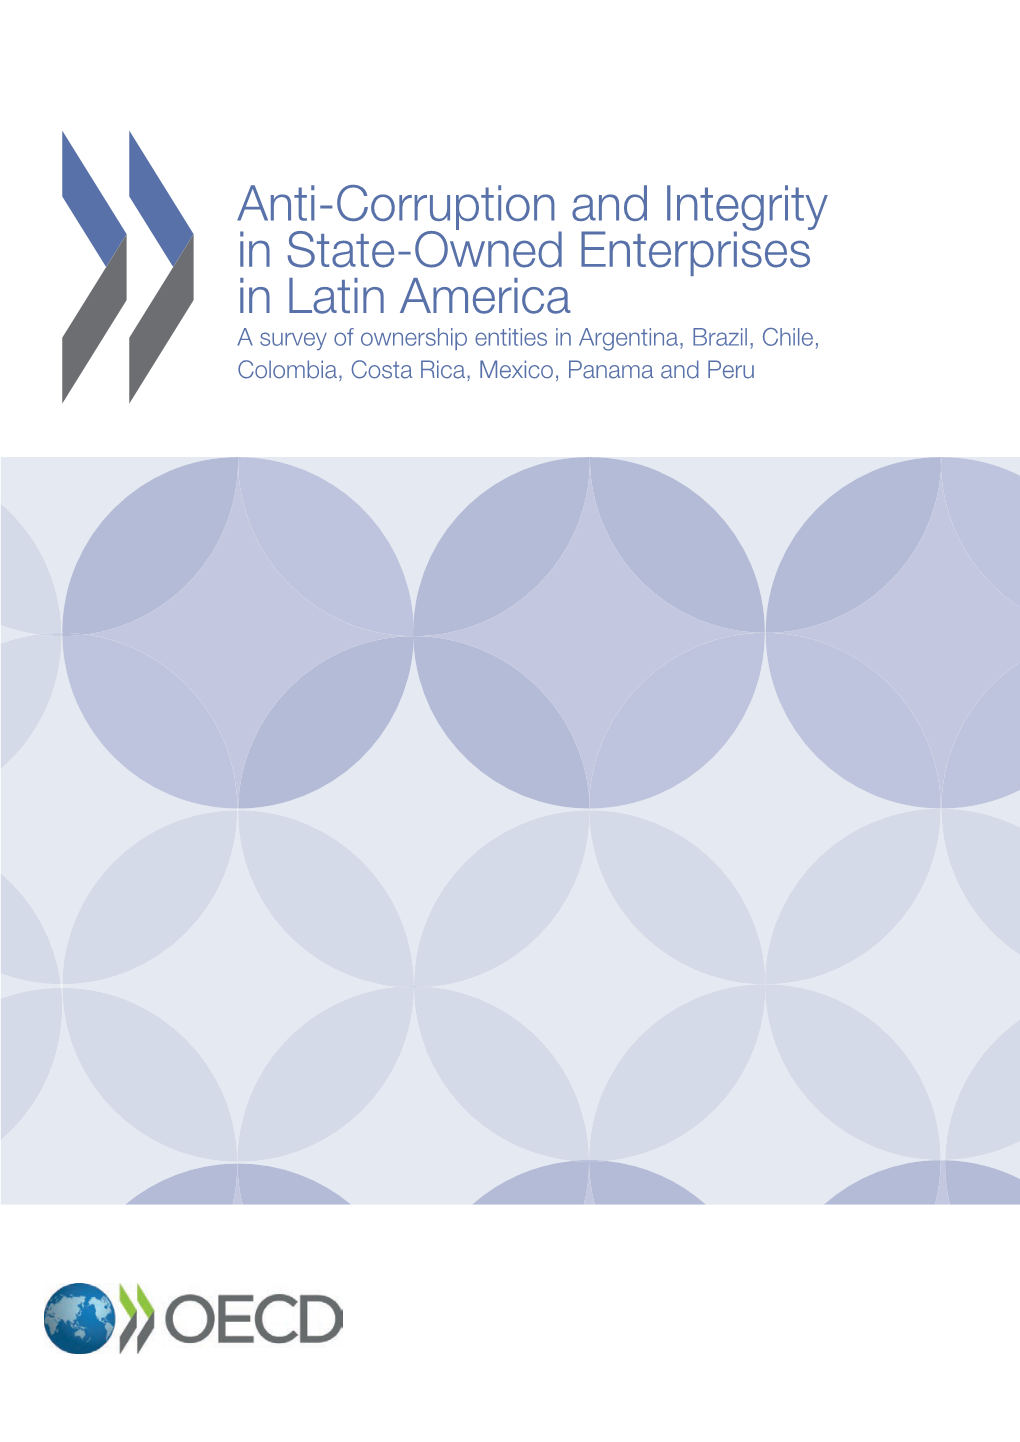 Anti-Corruption and Integrity in State-Owned Enterprises in Latin